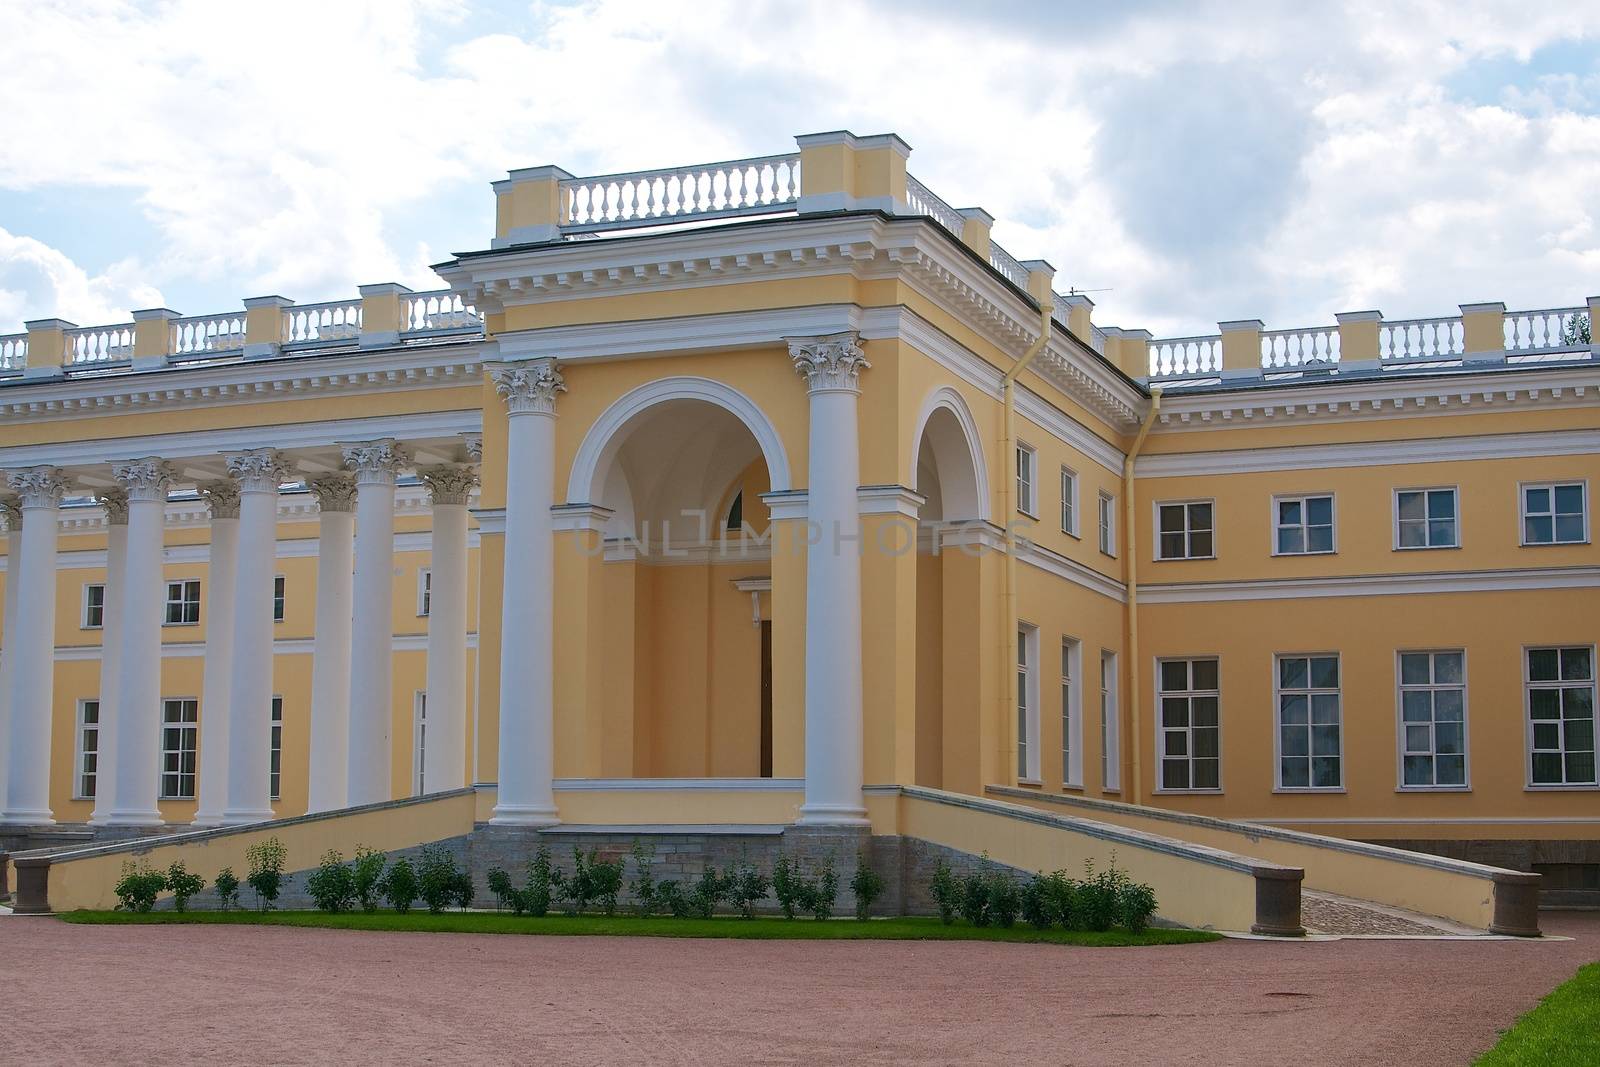 The picture of the Alexander's palace in Pushkino